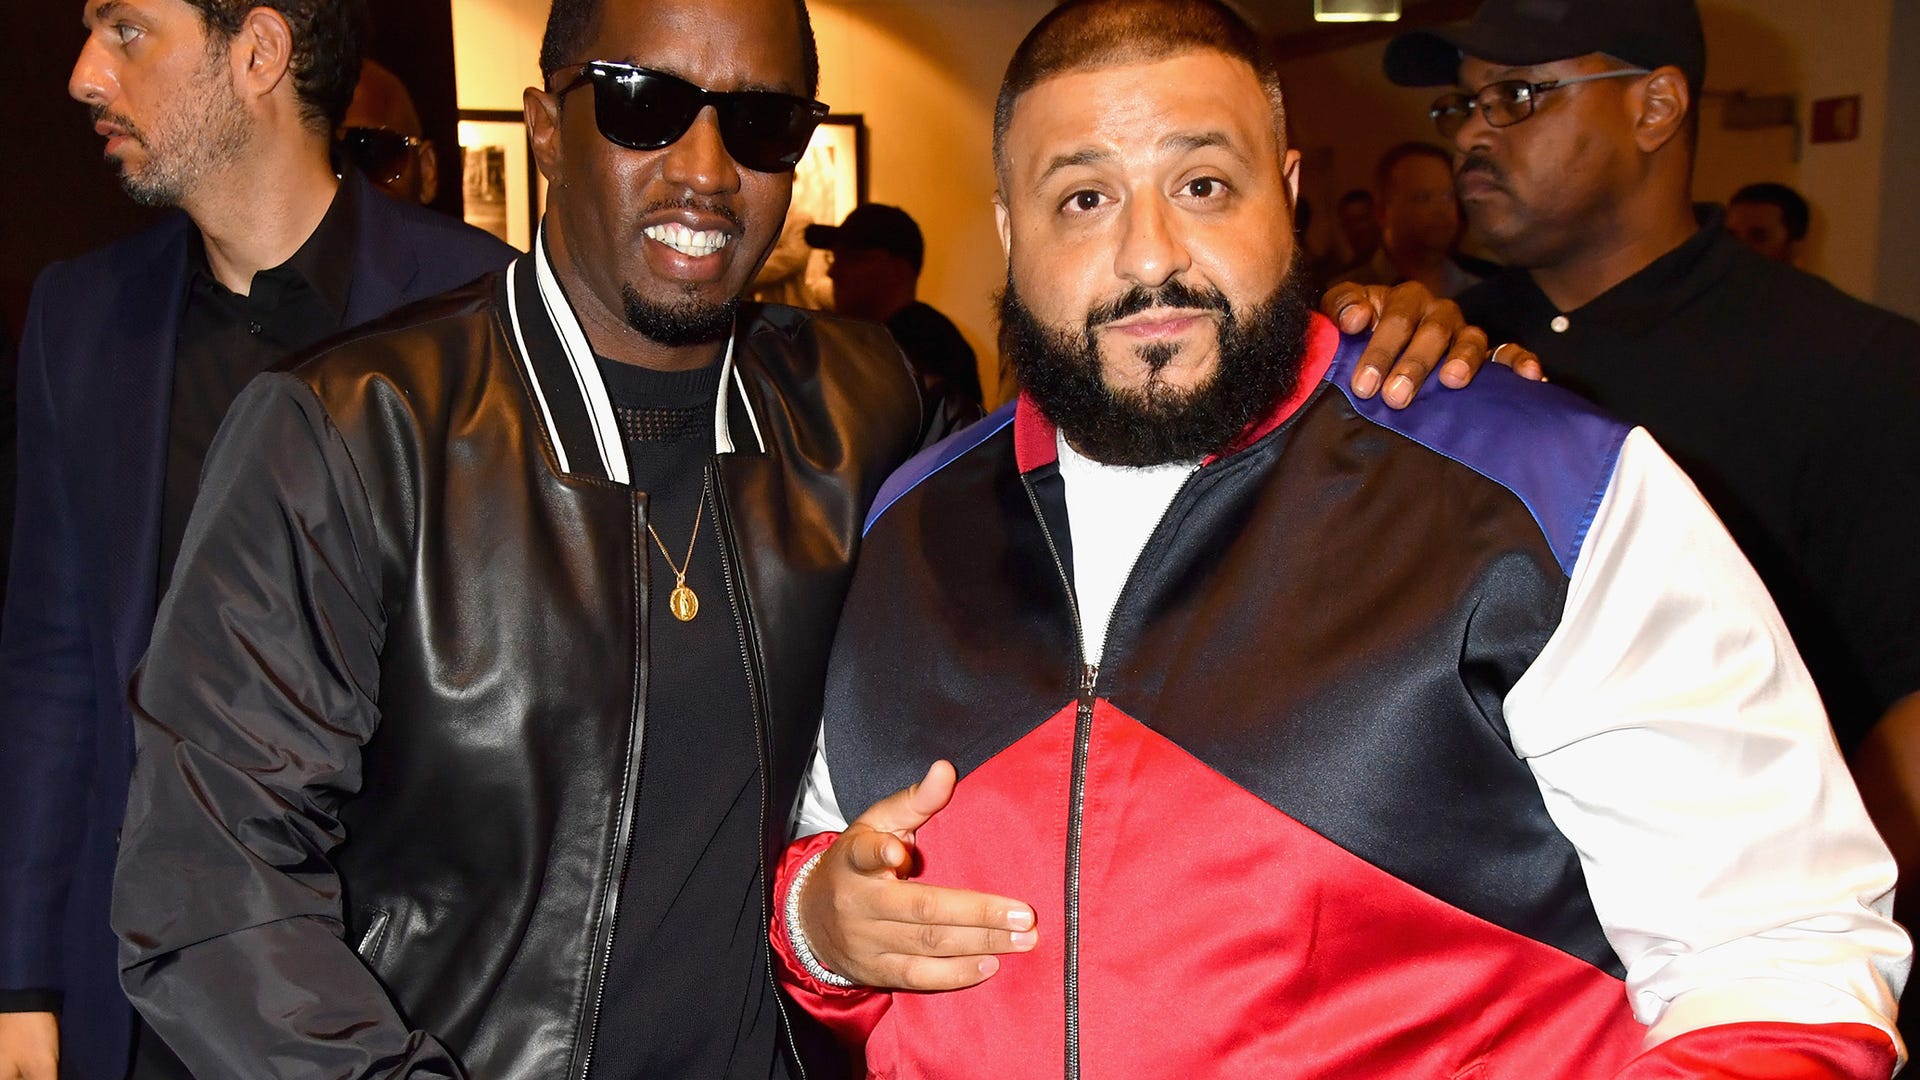 Sean "Diddy" Combs and DJ Khaled